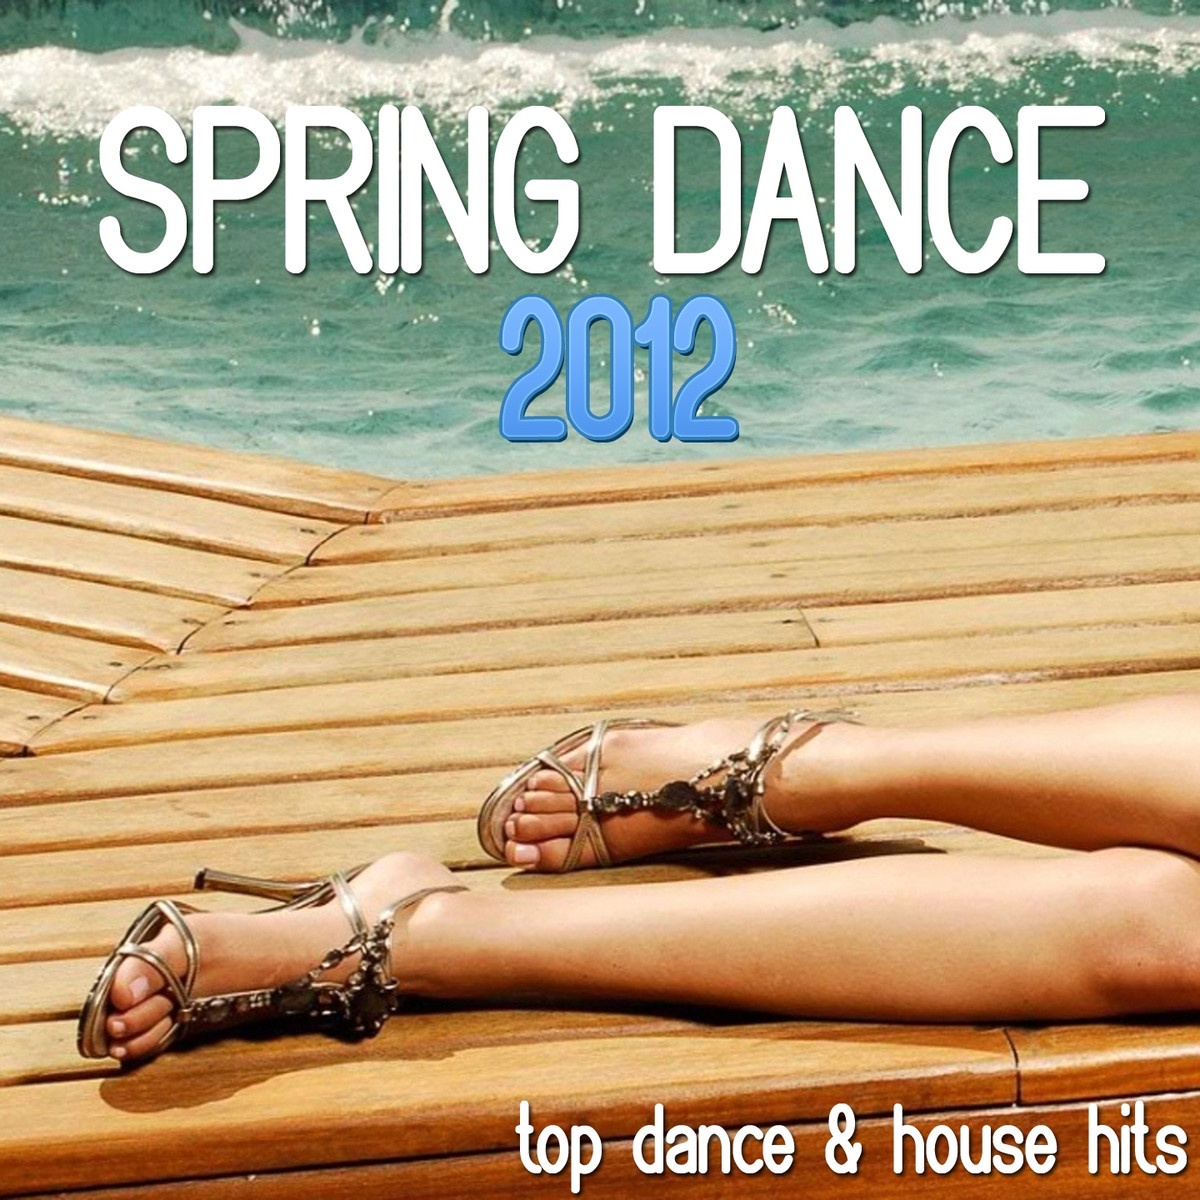 Spring Dance 2012 (Top Dance & House Hits)